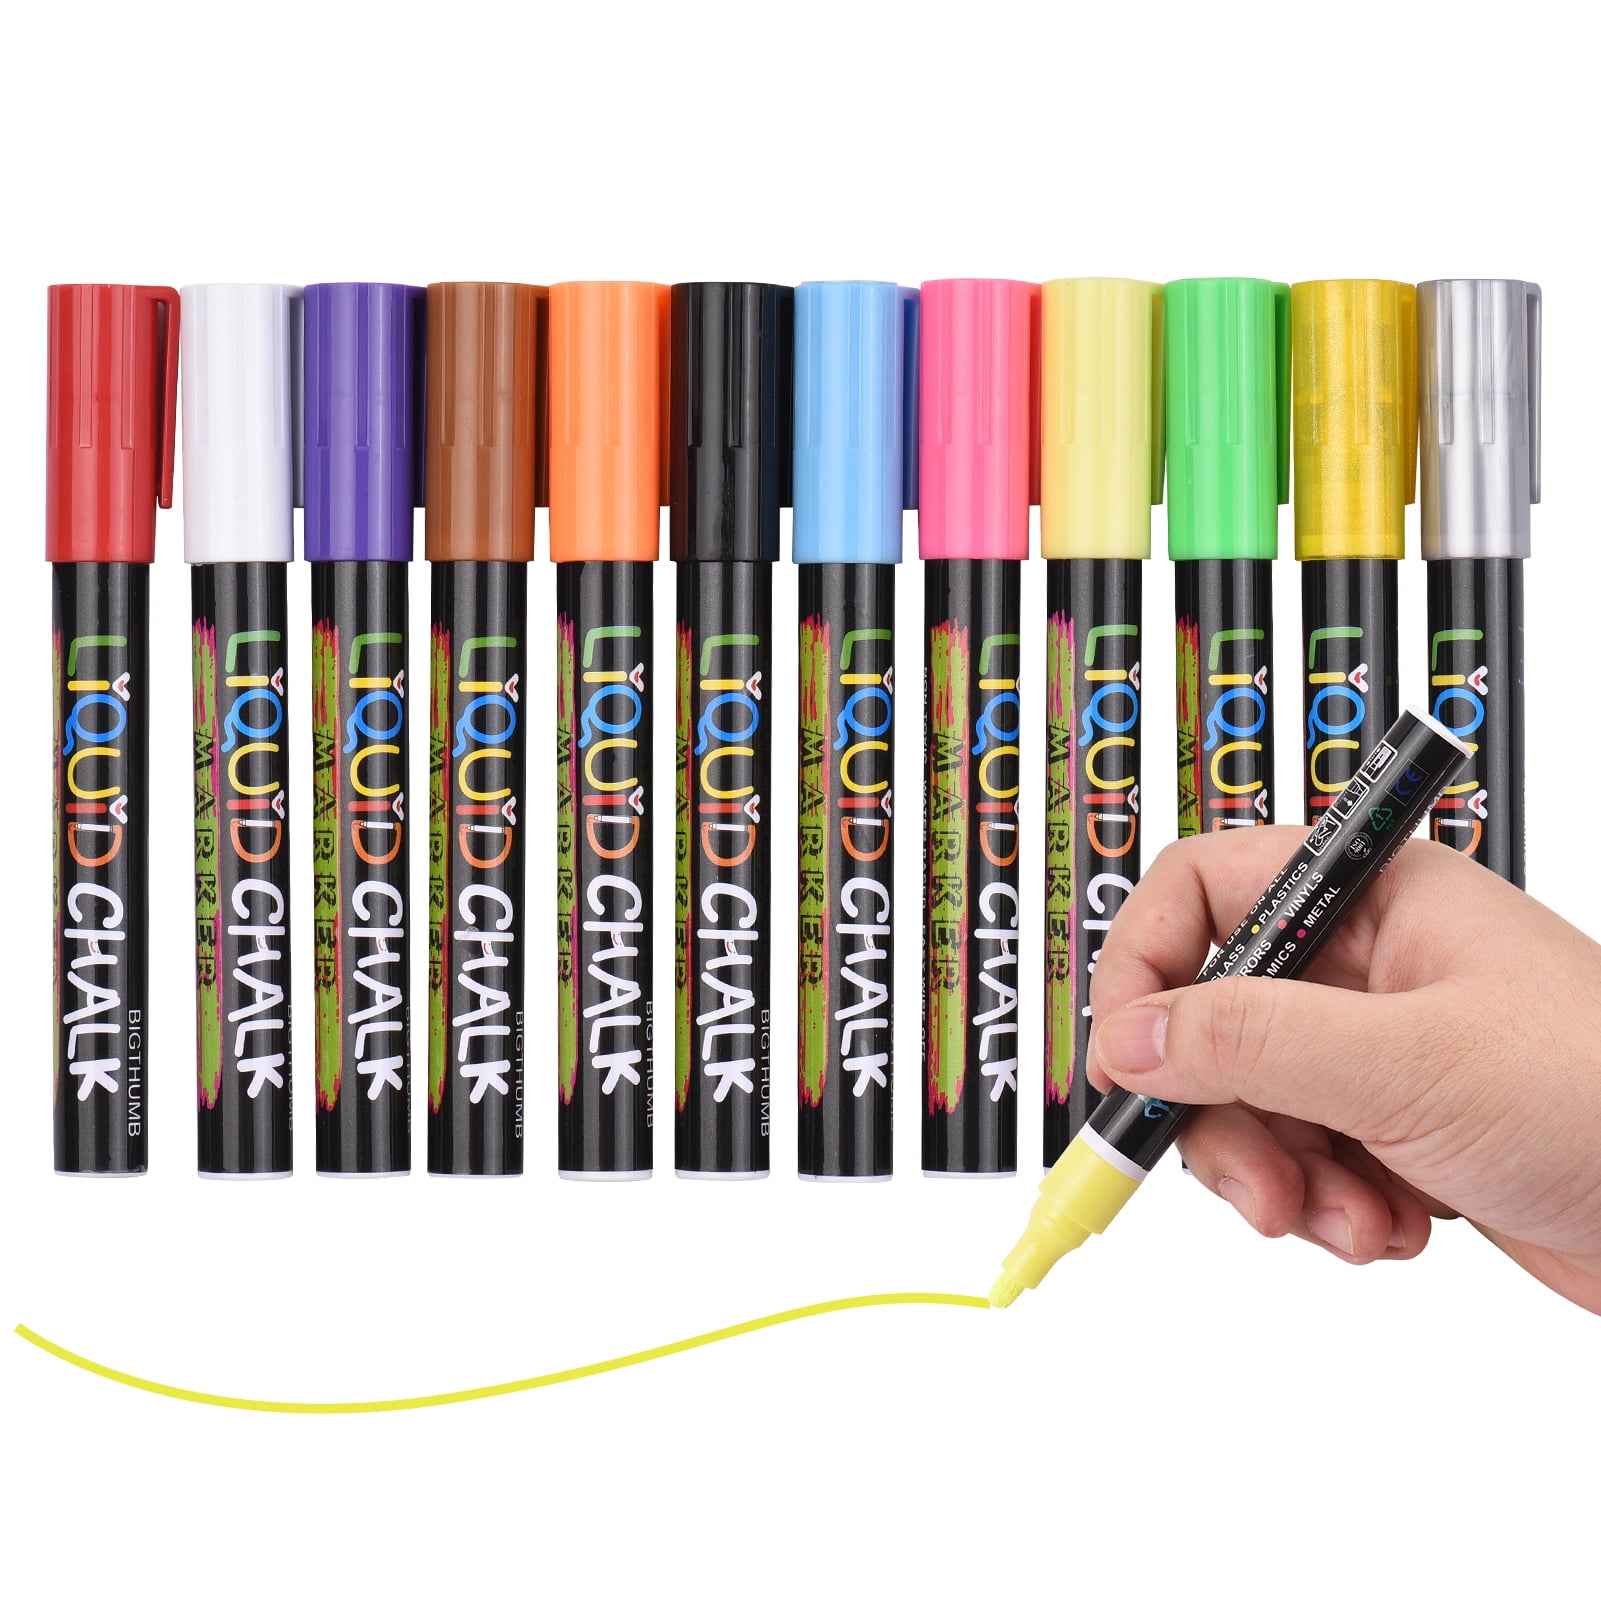 BIGTHUMB Chalk Markers for Chalkboards, Wet Erase Marker Pens for  Chalkboards Signs, Windows, Blackboard, Glass, Mirror Liquid Chalk Markers  on Any